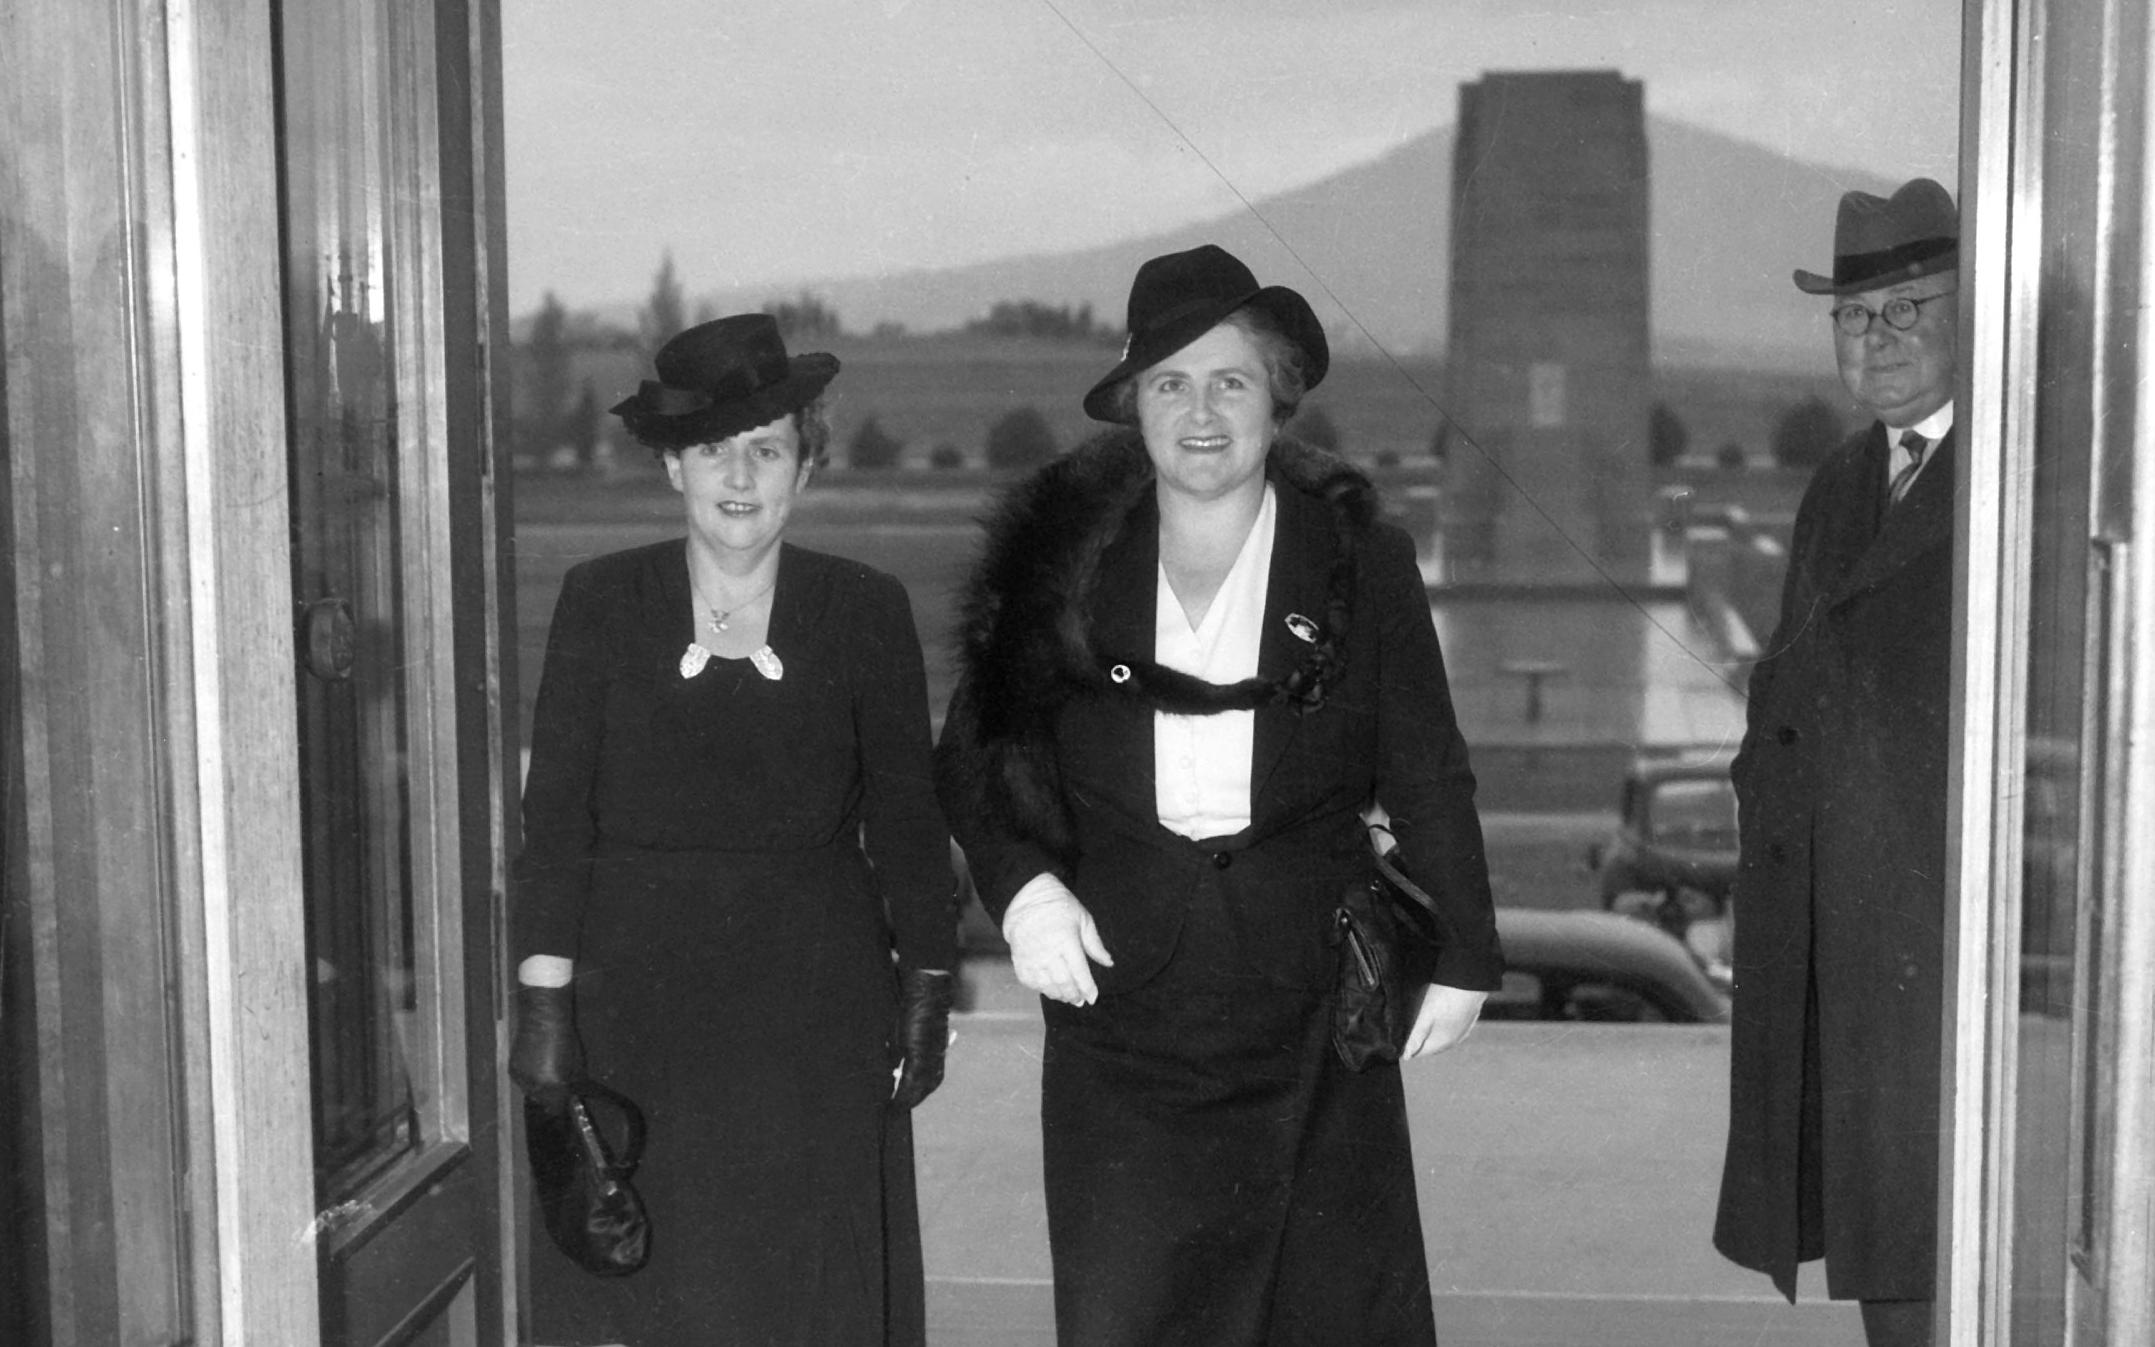 Dame Dorothy M. Tangney (left) and Dame Enid Lyons, GBE, entering the front door of the House of Representatives on 24 September 1943